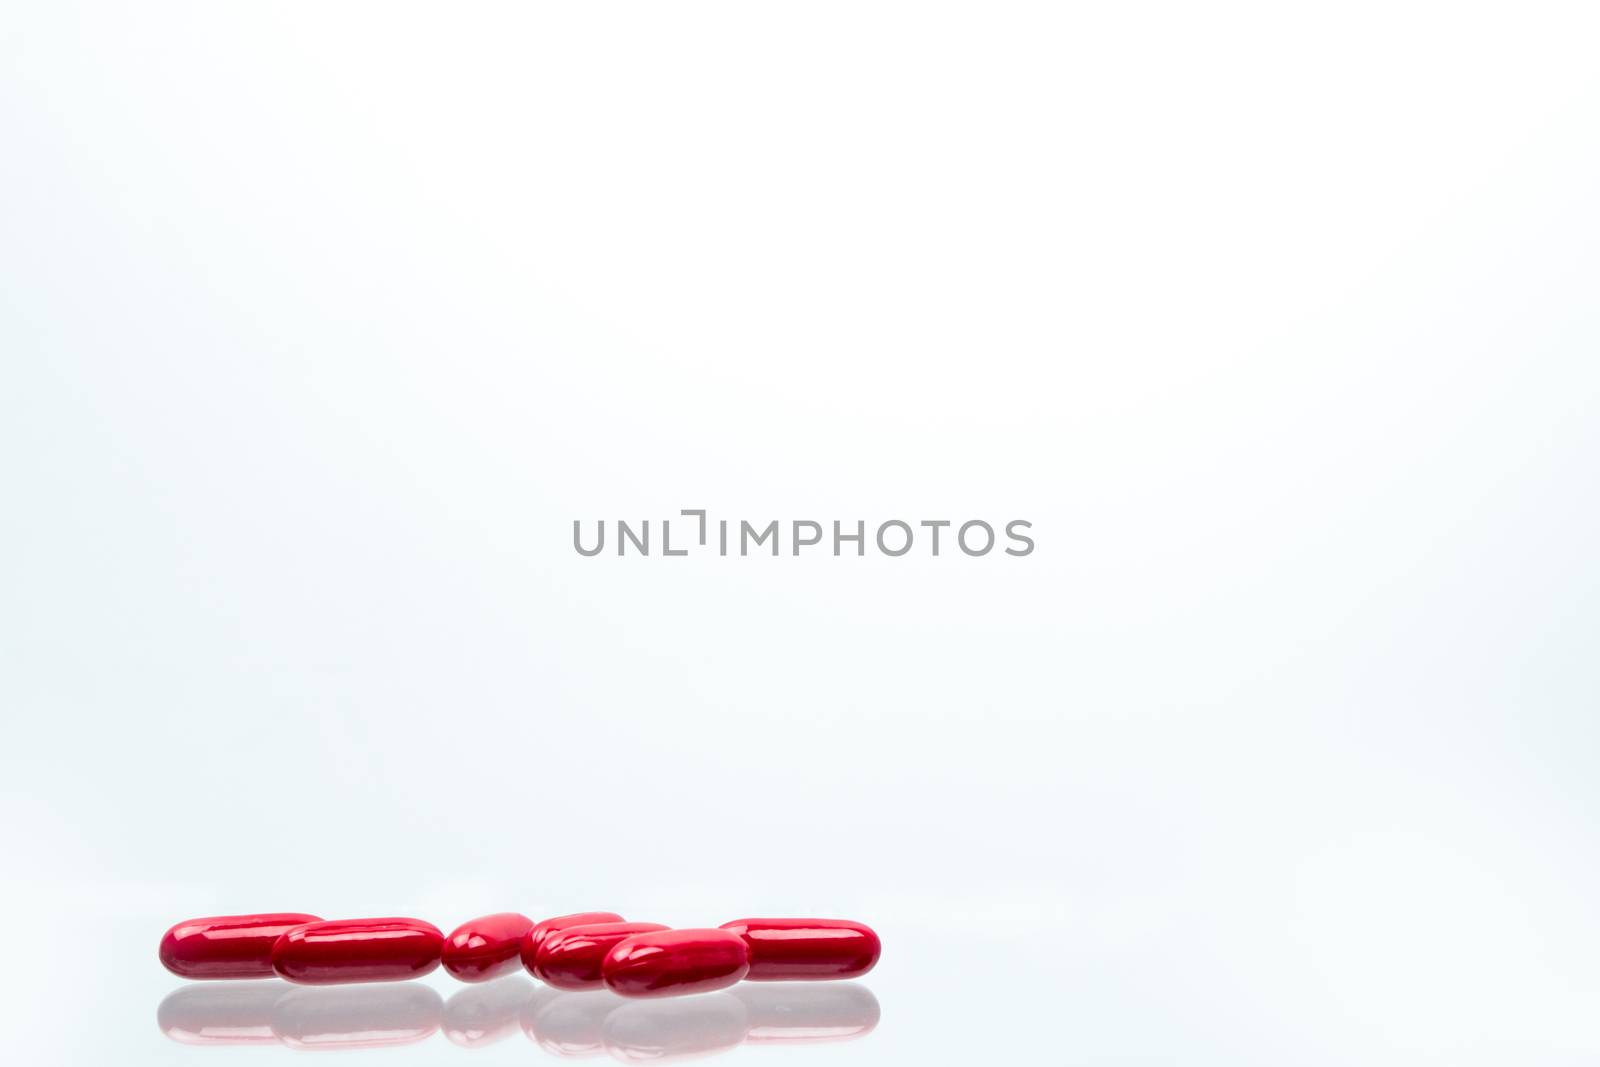 Red capsule pills isolated on white background with shadows and copy space for text. Vitamin and supplement for pregnancy and elderly people. Pharmaceutical industry. Pharmacy background. Global healthcare concept. by Fahroni